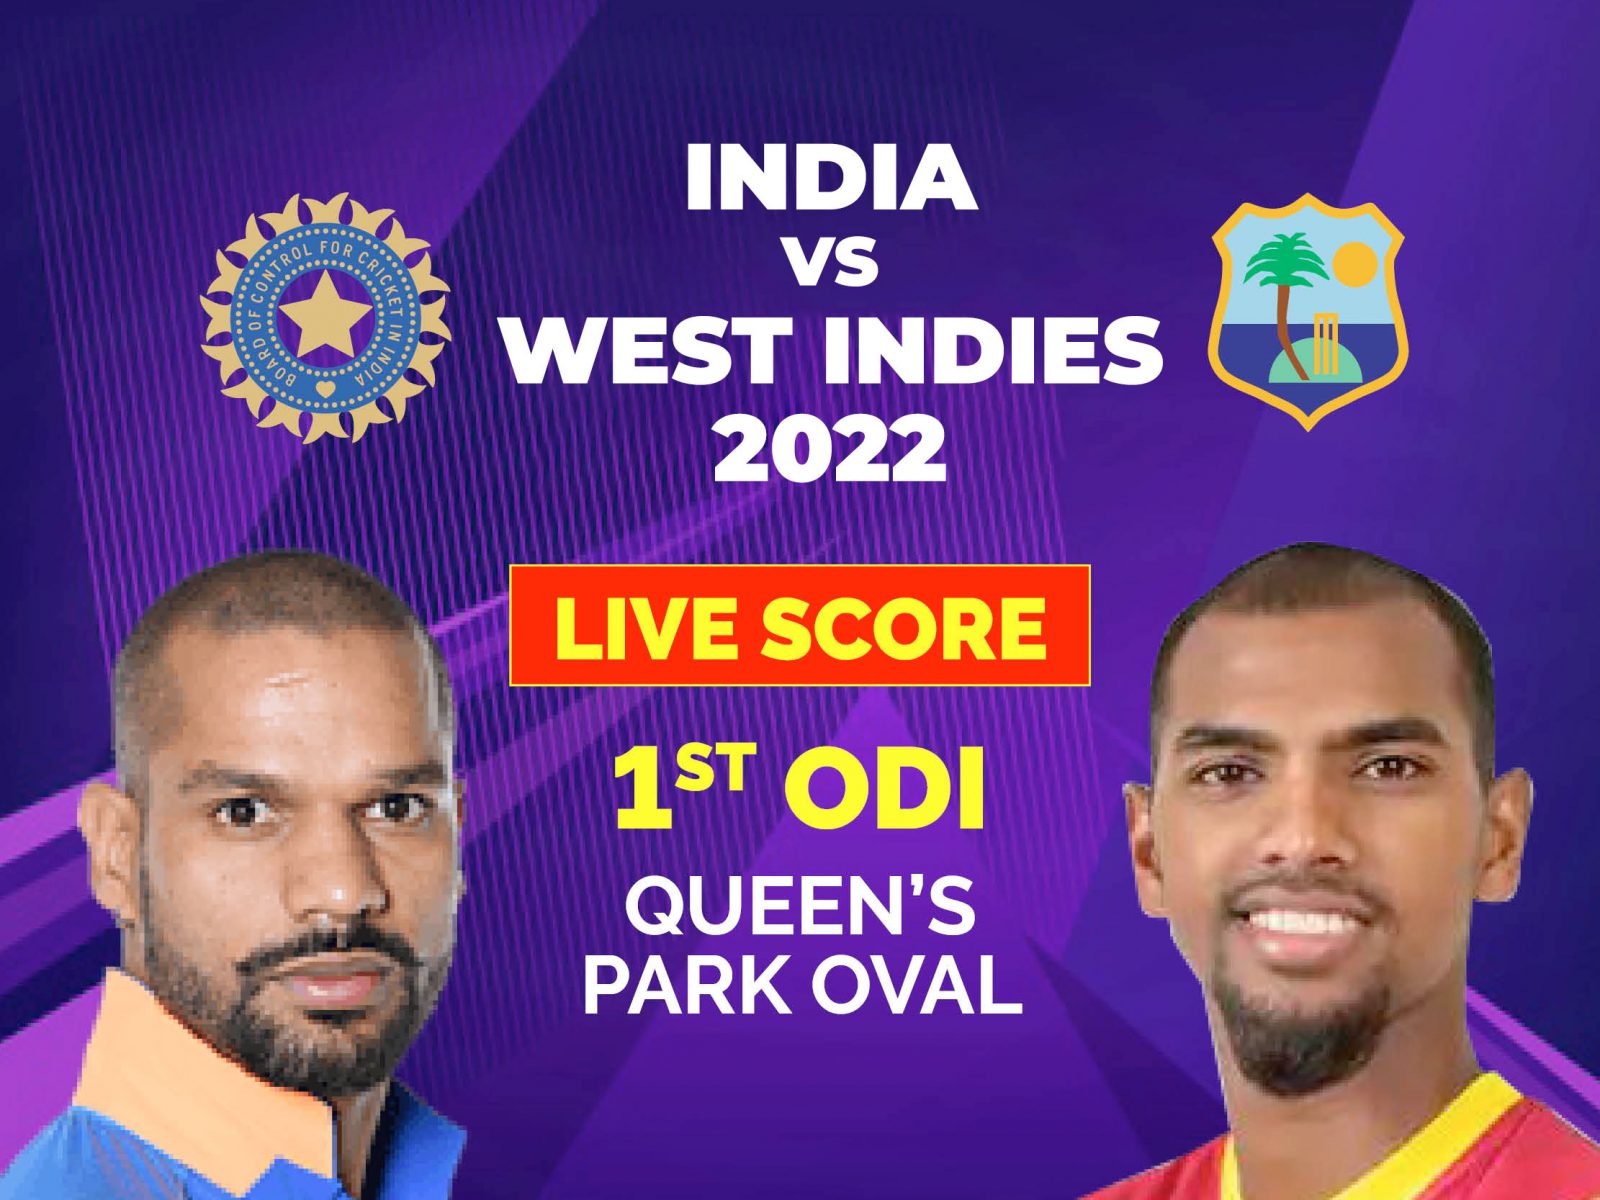 india west indies match live tv channel